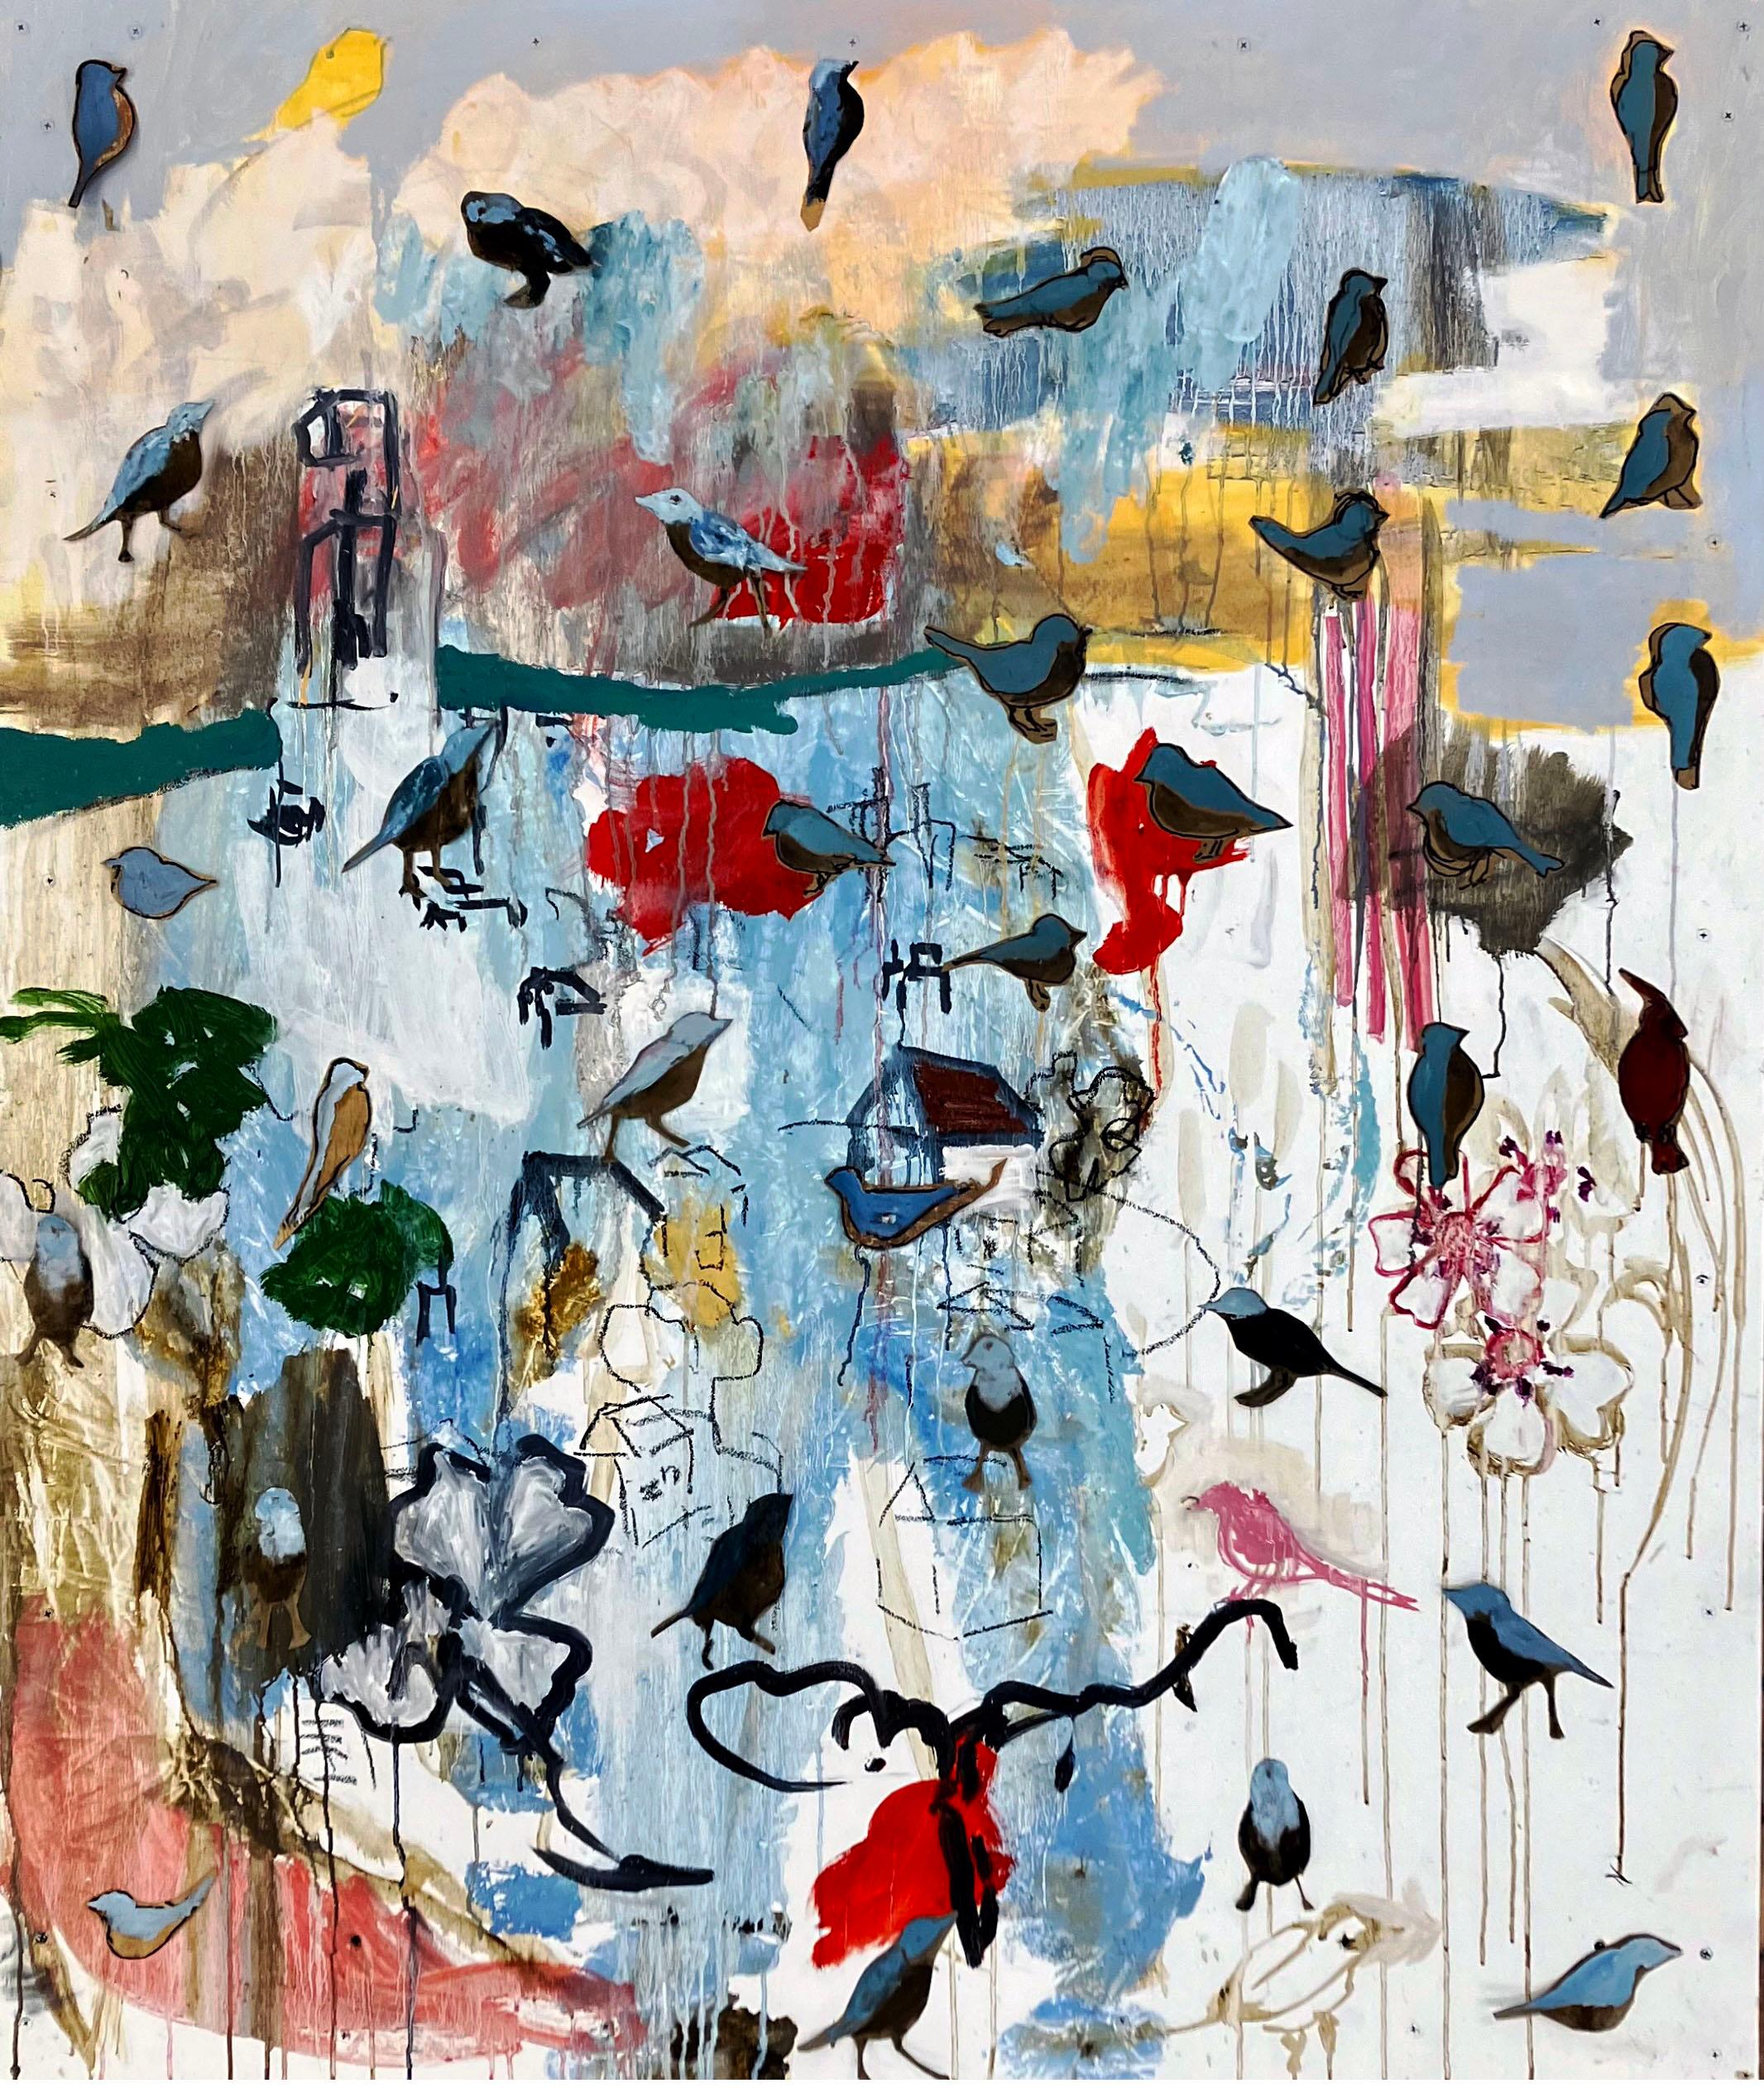 Nessun Dorma (No one sleeps) colorful abstract painting, birds, blue, grey tones